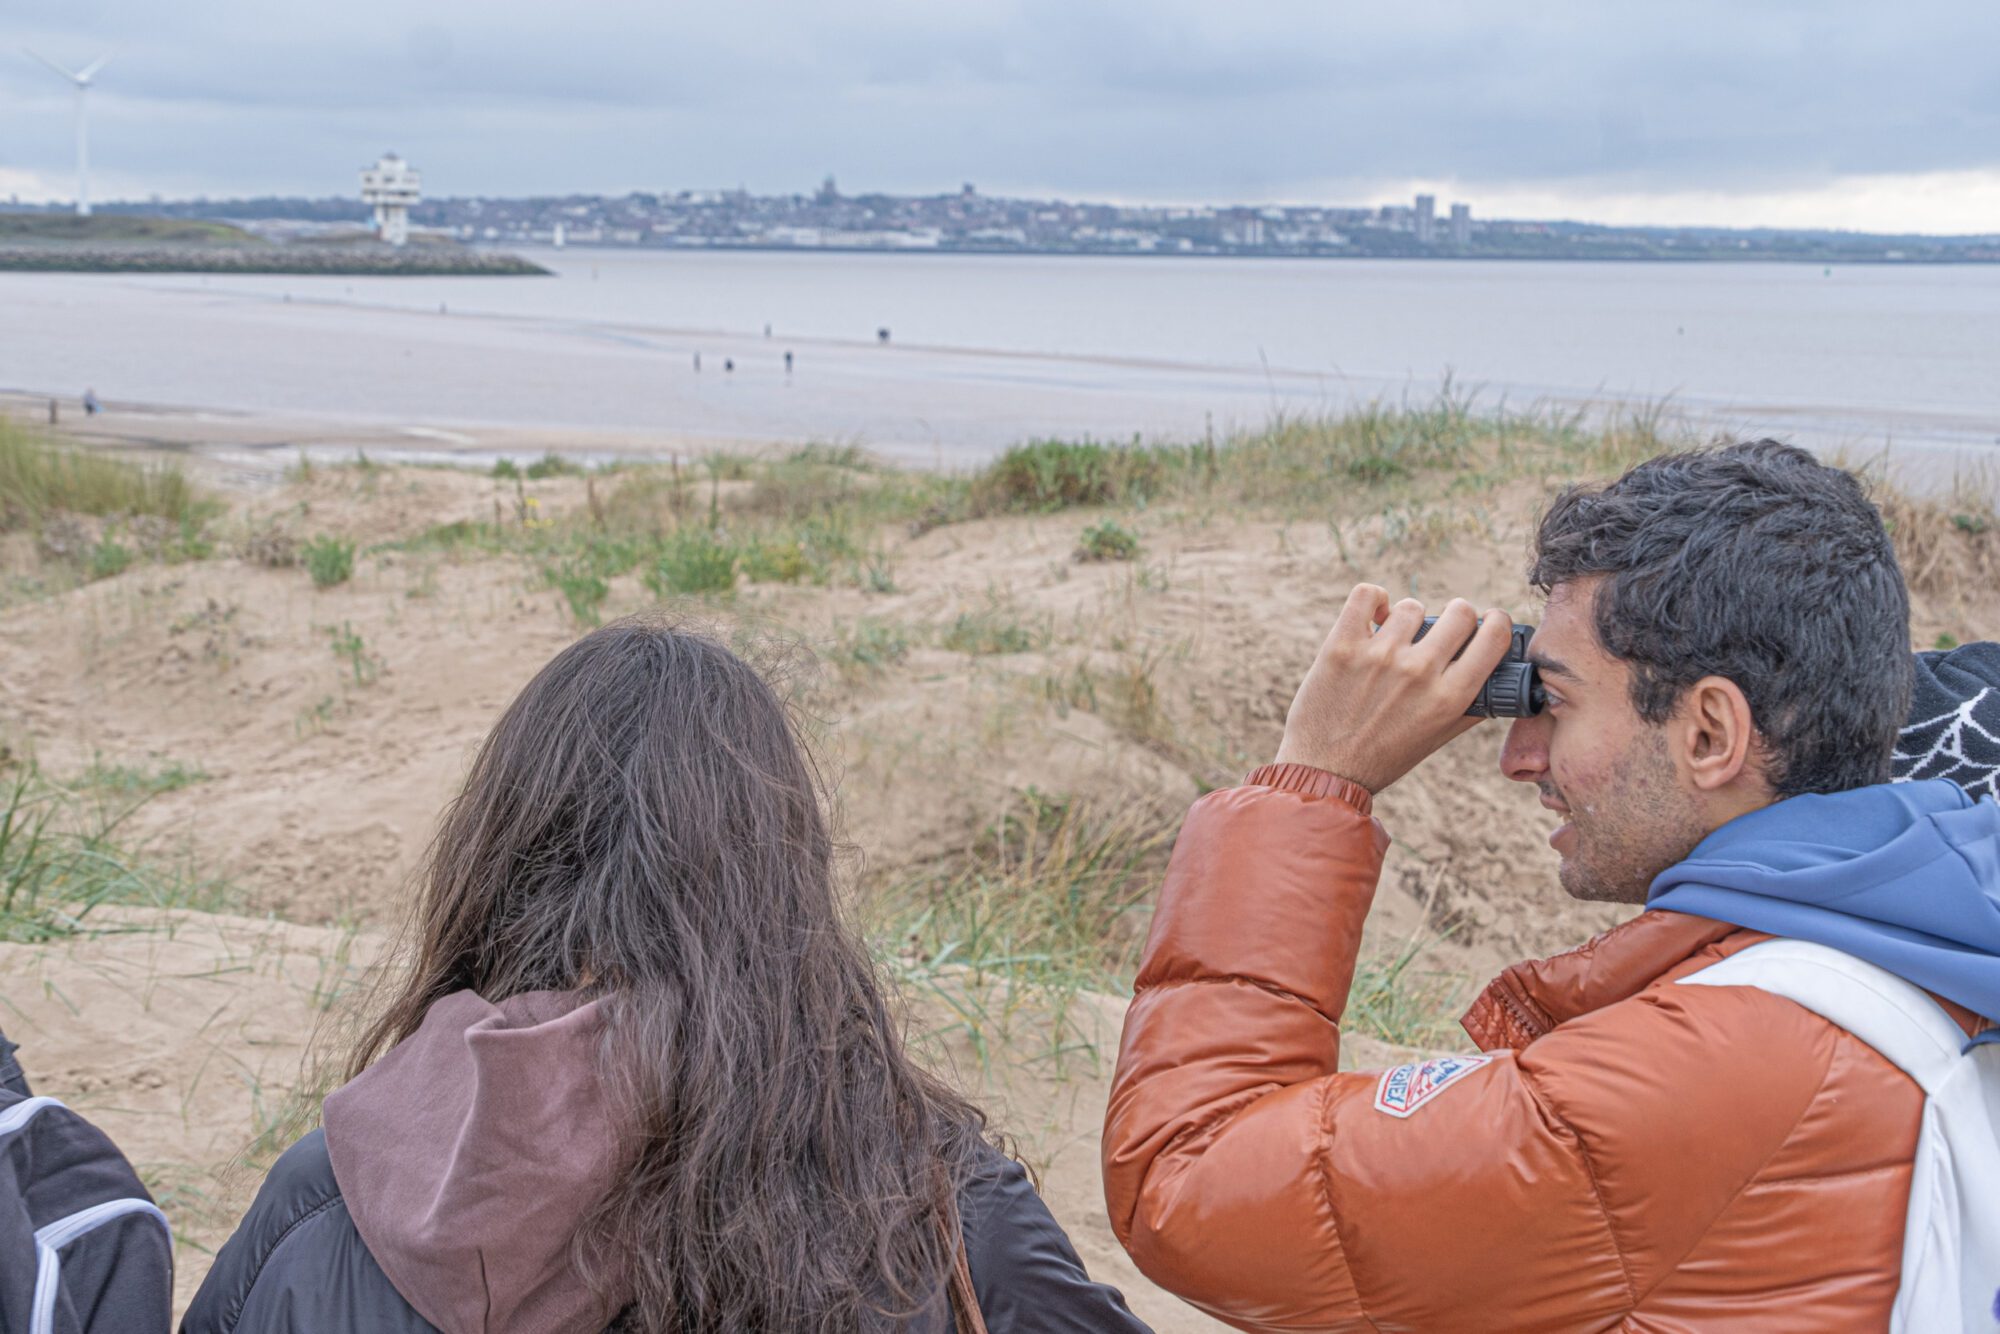 Two people walk among sand dunes, observing at a distant port across the water. One looks through binoculars.